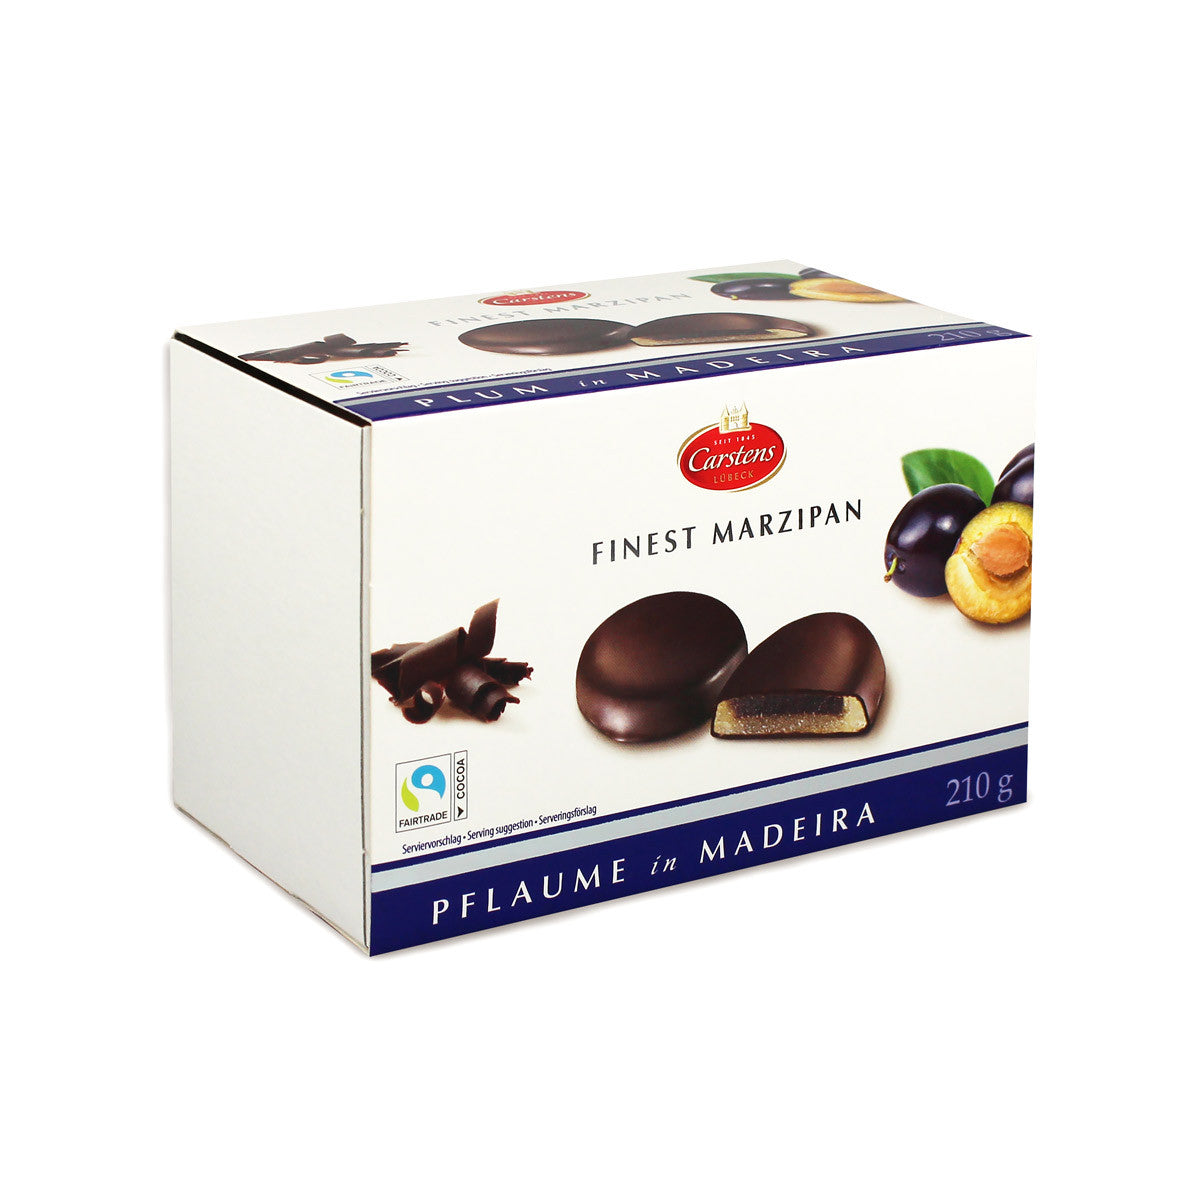 Plum in Madeira Chocolate Covered Marzipan Box – Sweet Cloud Gifts